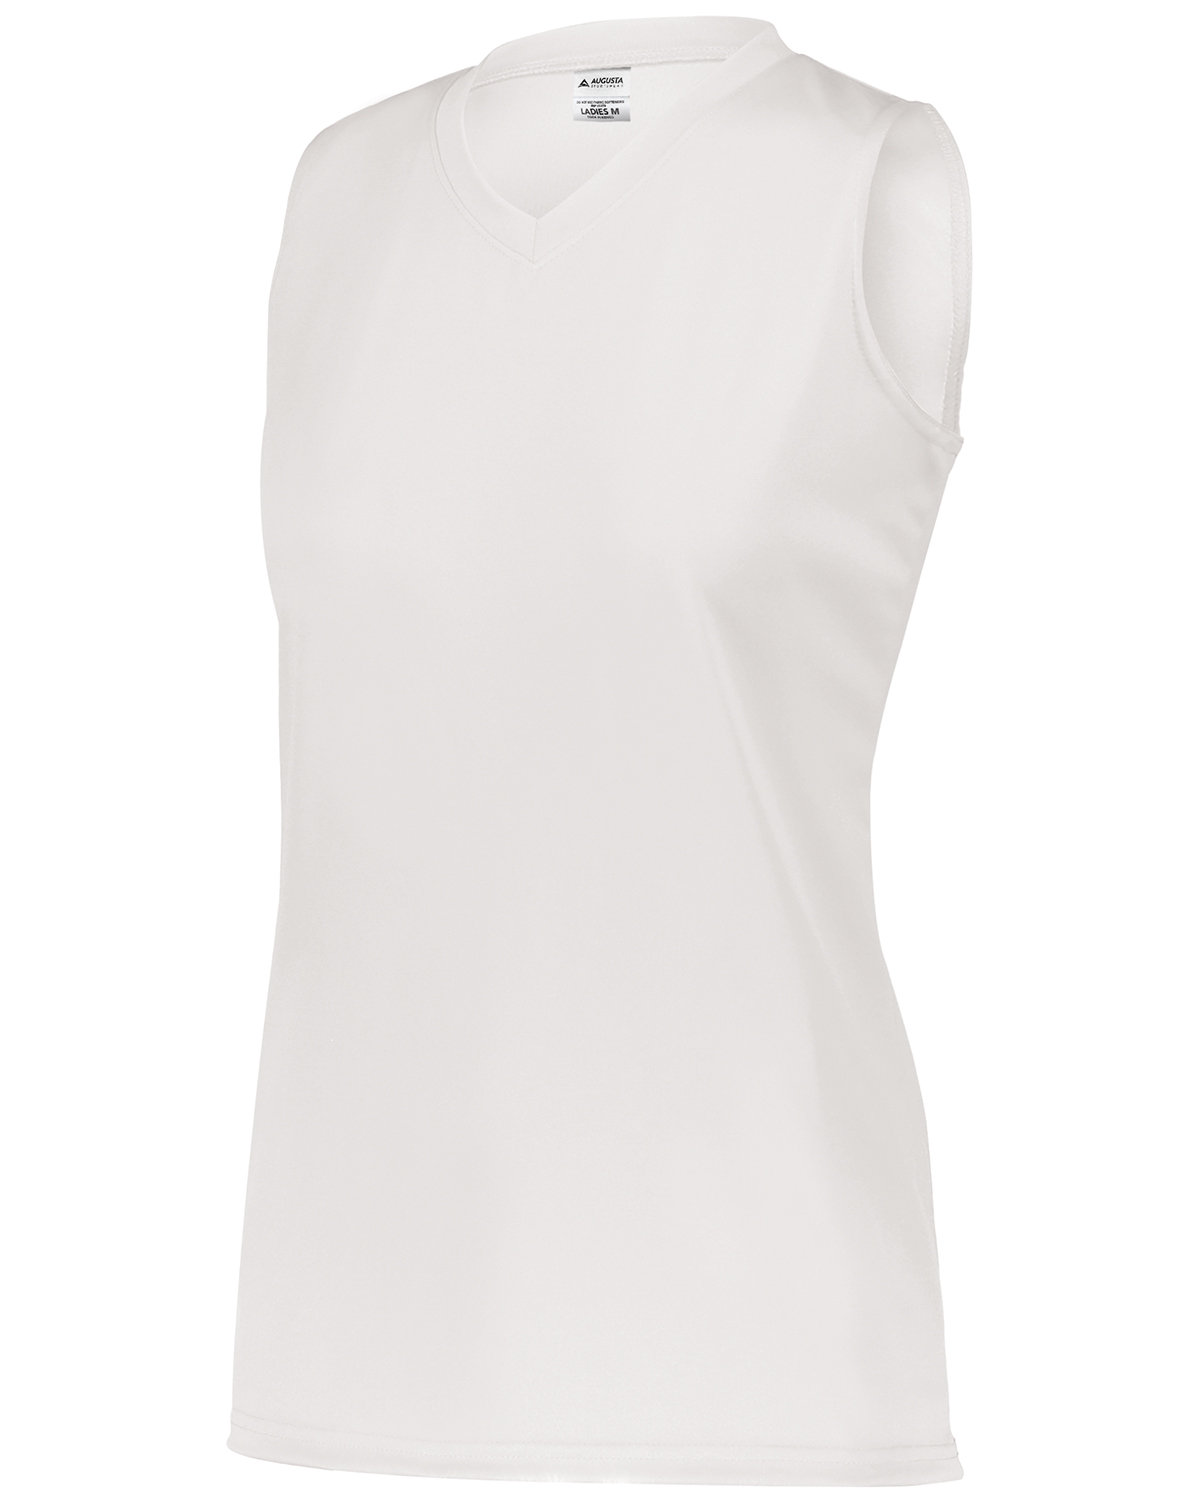 Front view of Girls Sleeveless Wicking Attain Jersey